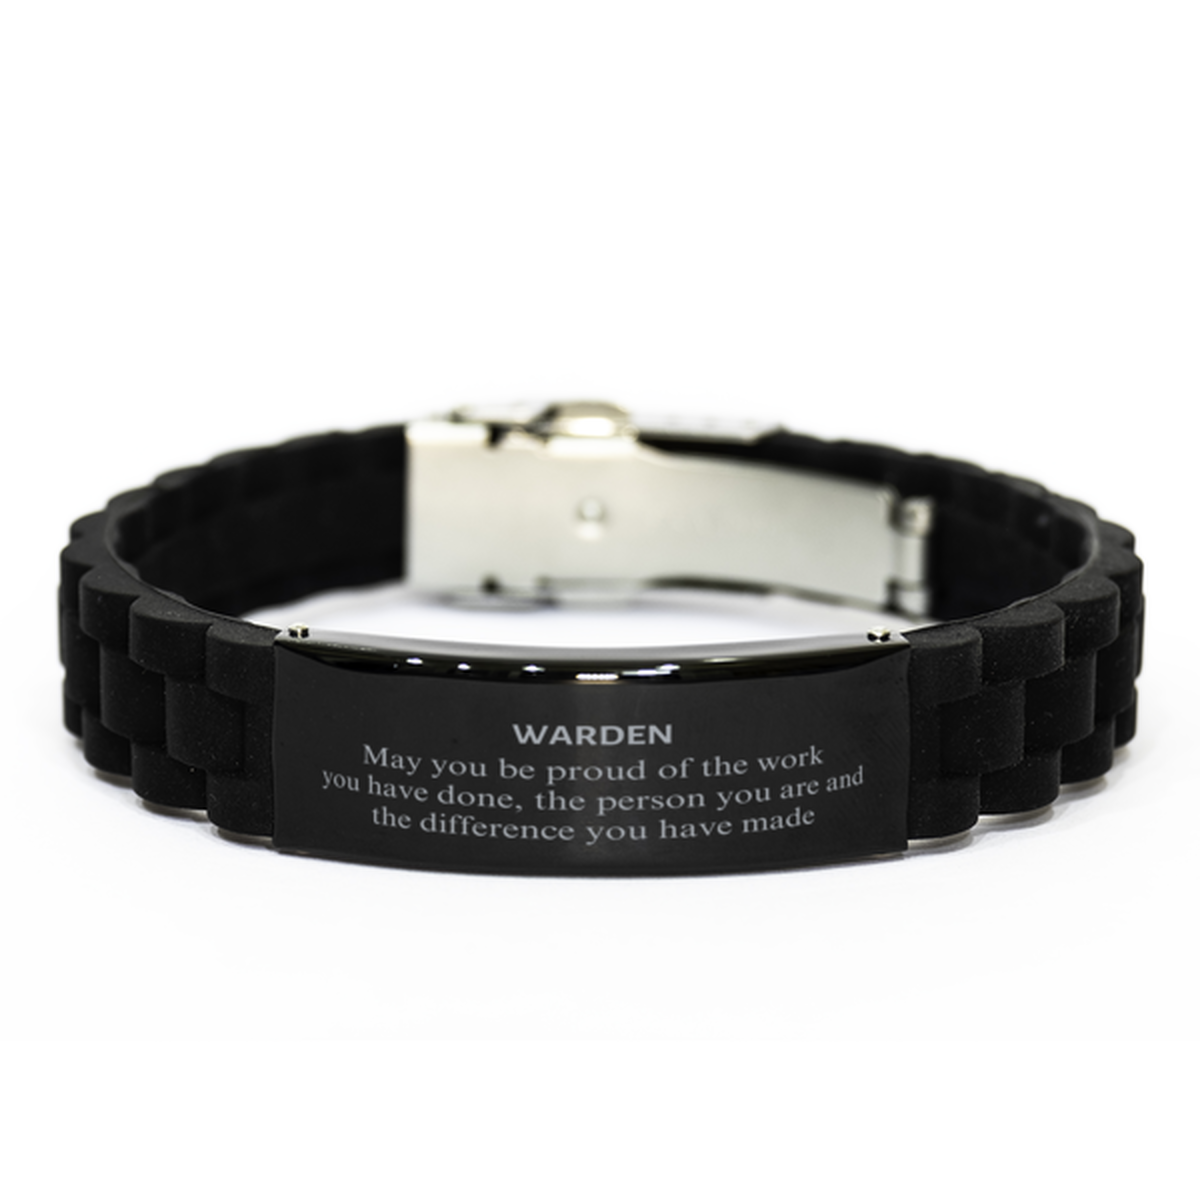 Warden May you be proud of the work you have done, Retirement Warden Black Glidelock Clasp Bracelet for Colleague Appreciation Gifts Amazing for Warden